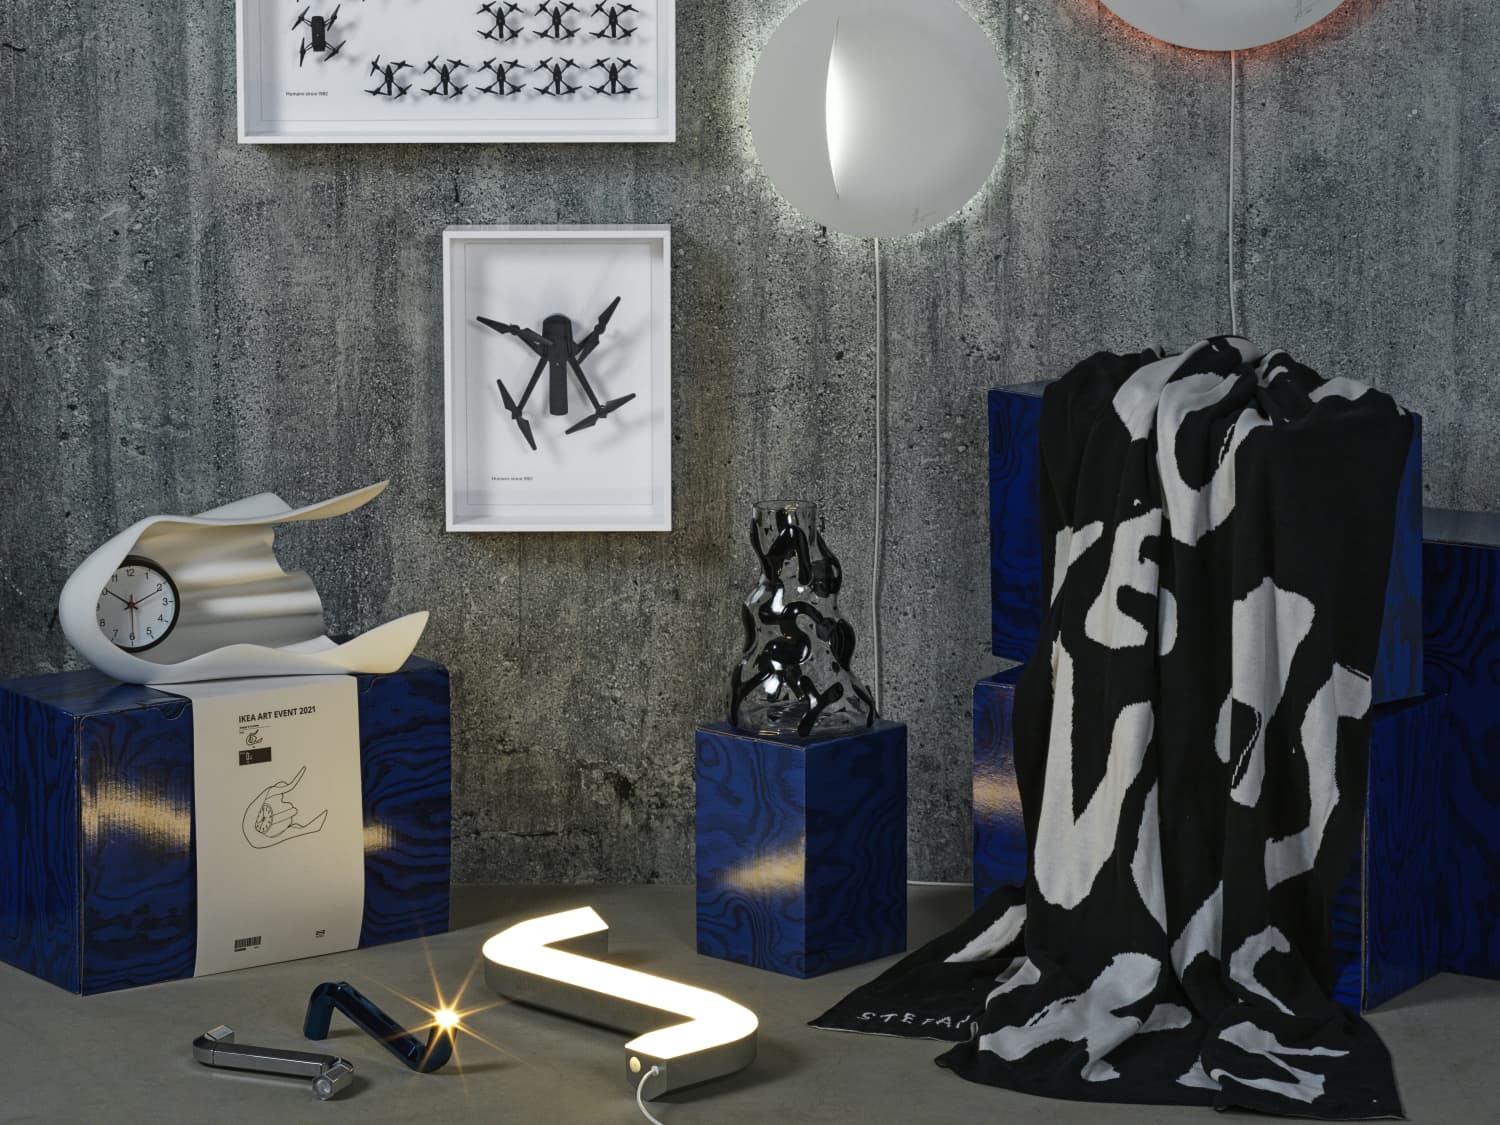 IKEA's Latest Art Collection Is Inspired by Functional Items